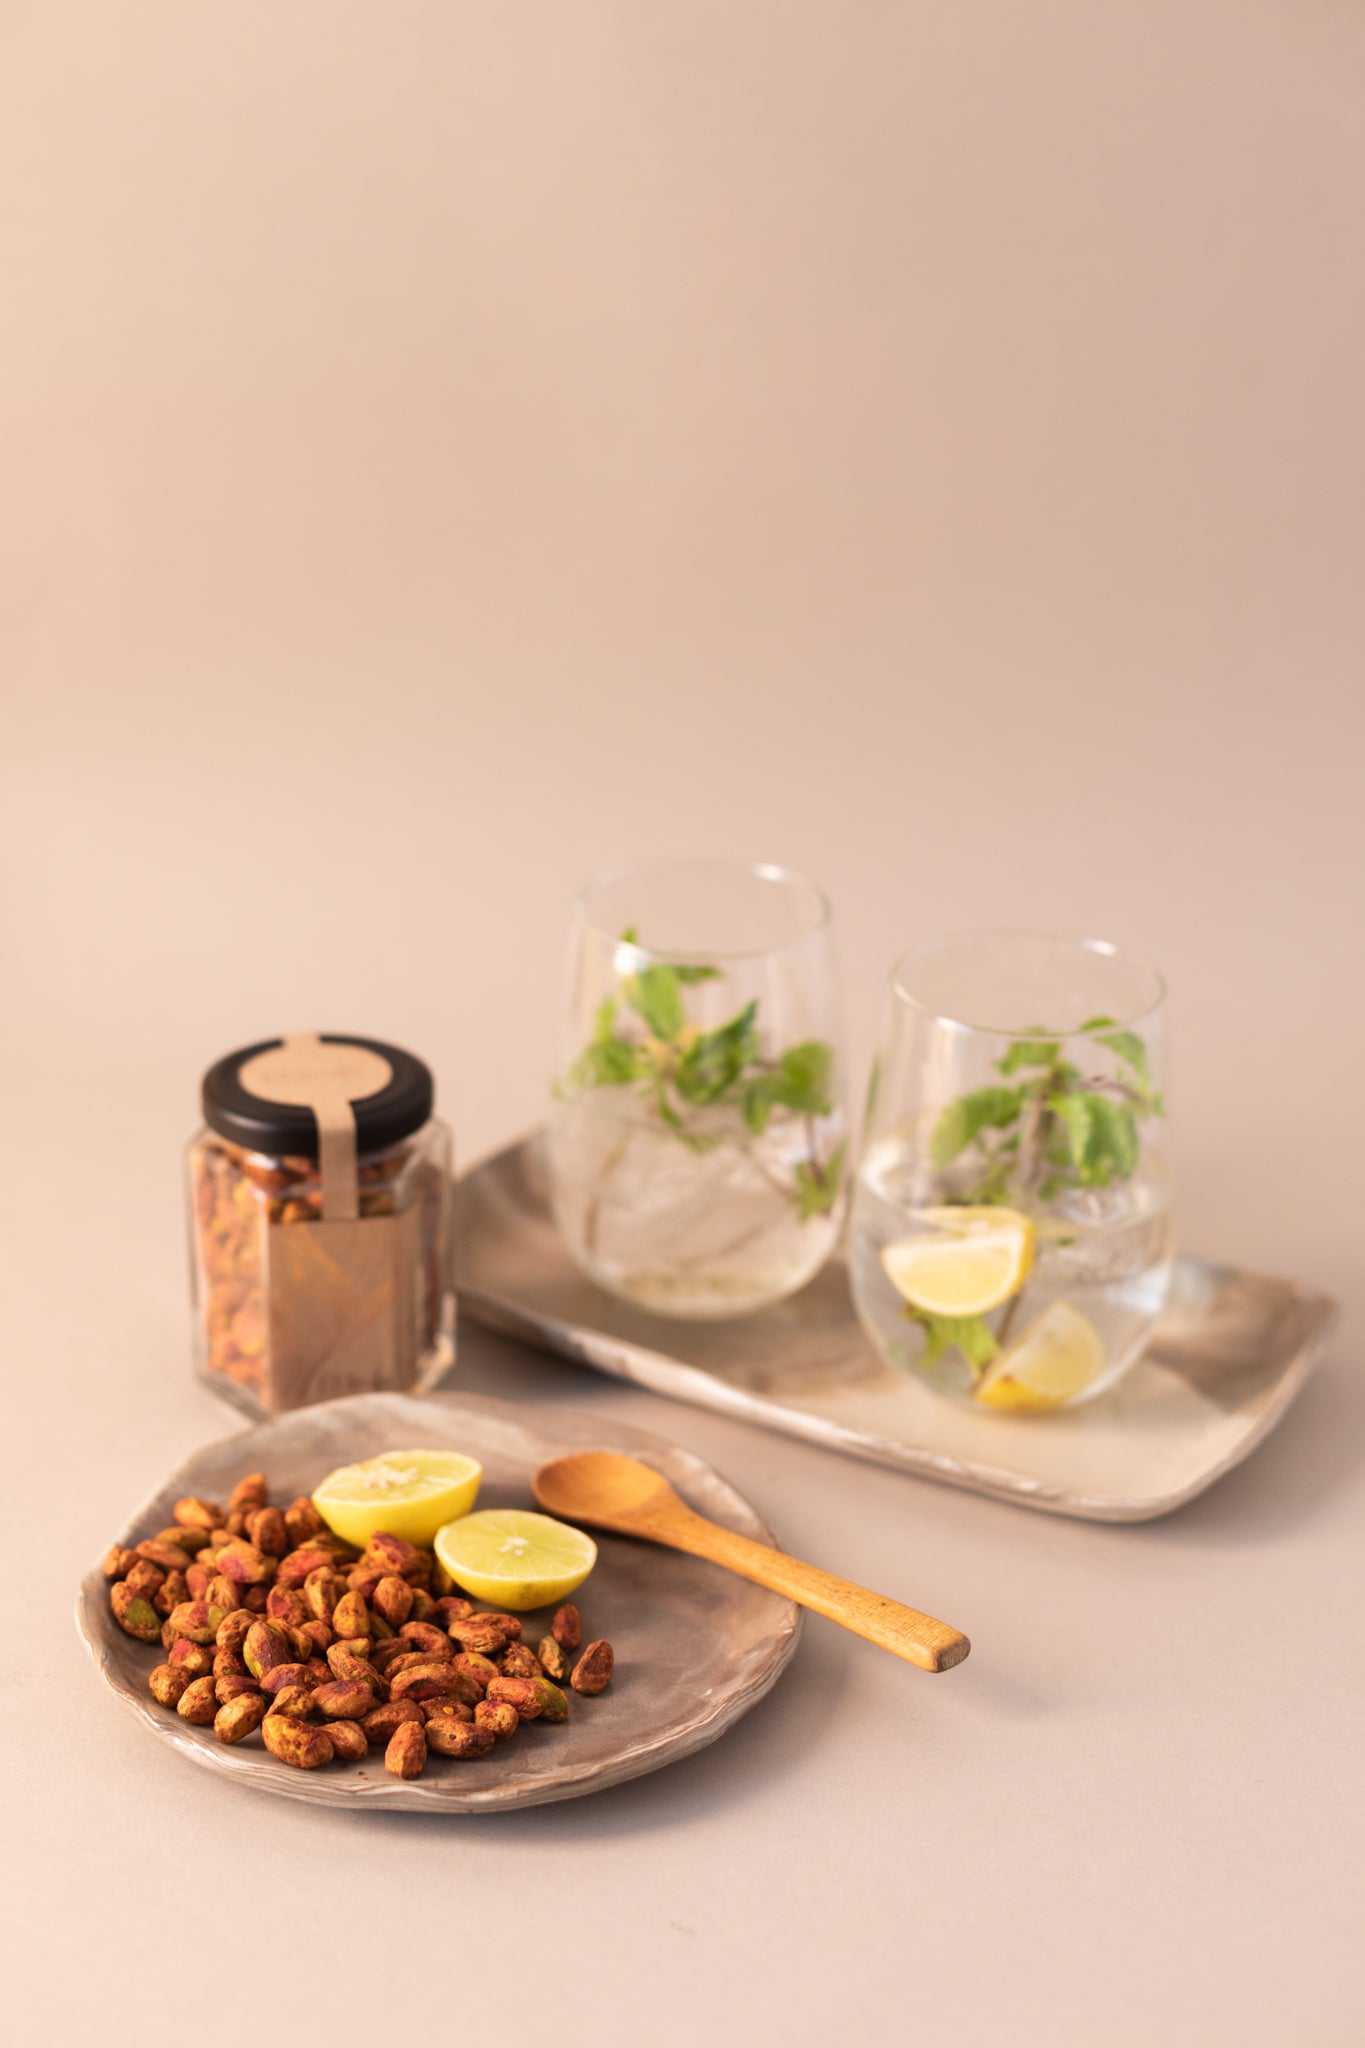 Roasted pistachio kernels flavoured with chilli and lime accompanying a light summer drink